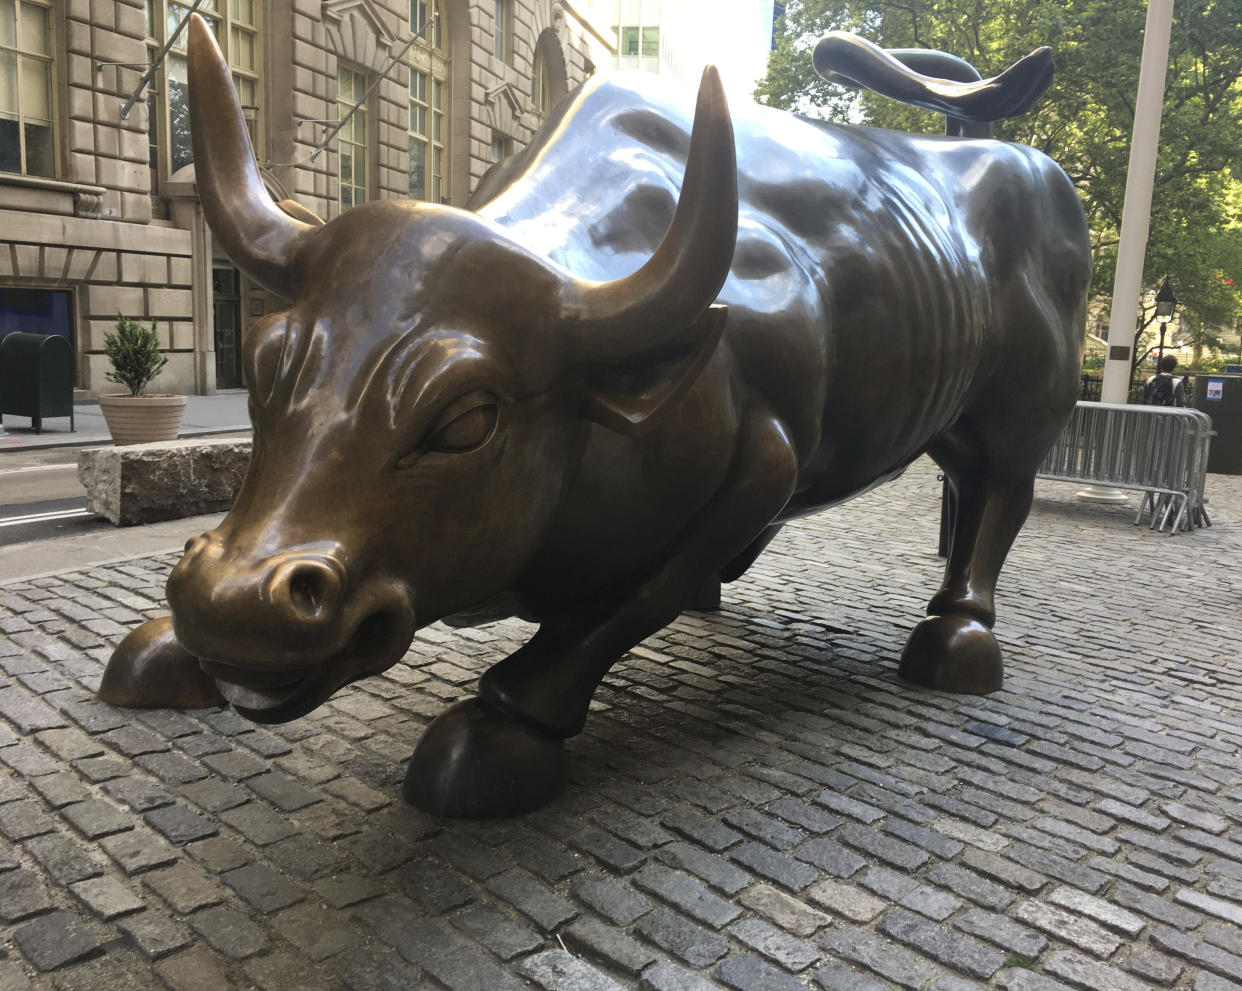 A bronze sculpture of a charging bull is shown on cobblestones near the New York Stock Exchange.